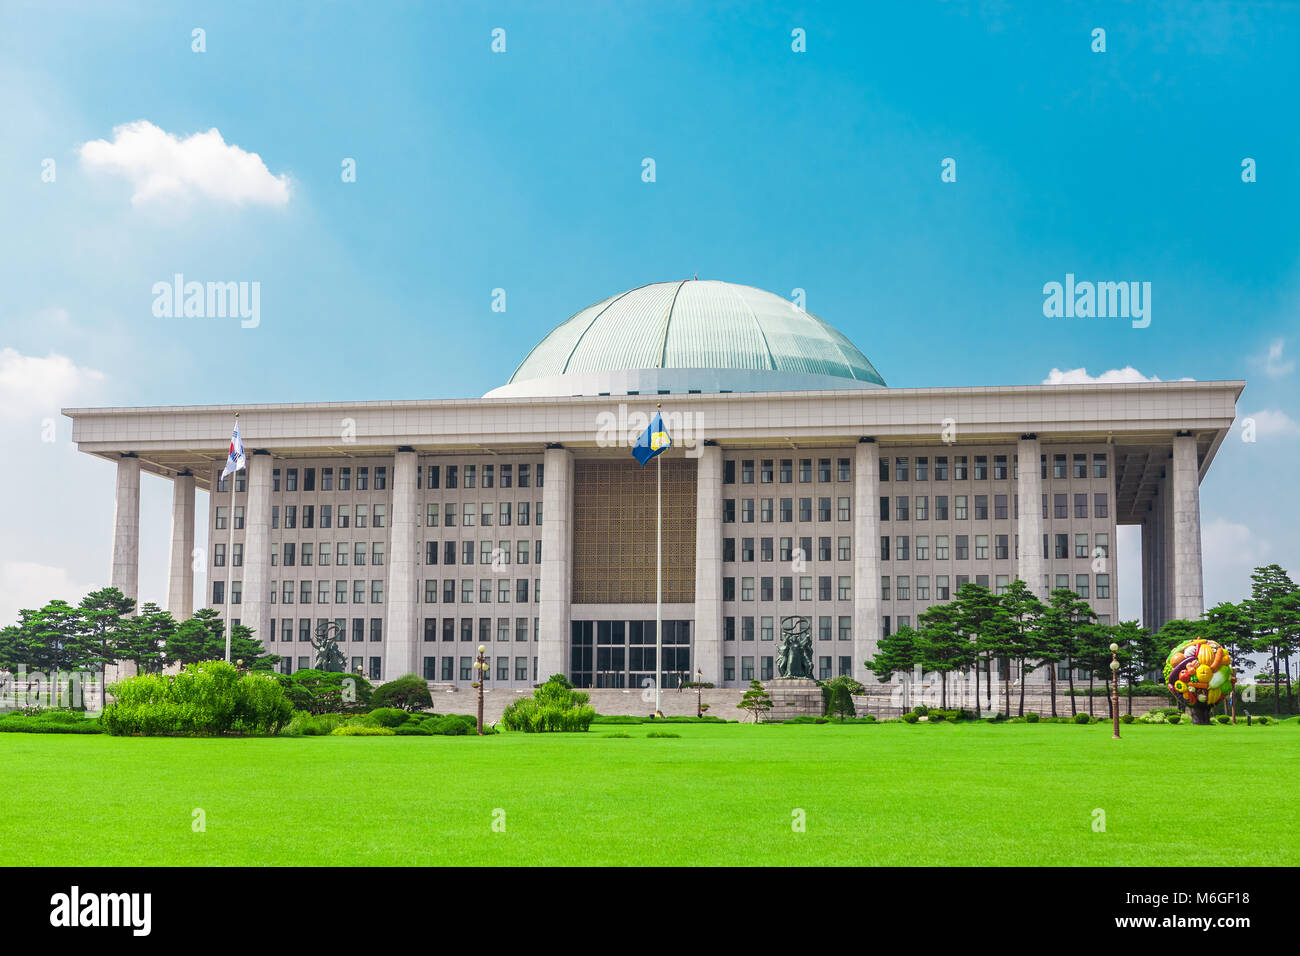 SEOUL, KOREA - AUGUST 14, 2015: The National Assembly Proceeding Hall building - famous South Korean Capitol - located on Yeouido island - Seoul, Sout Stock Photo